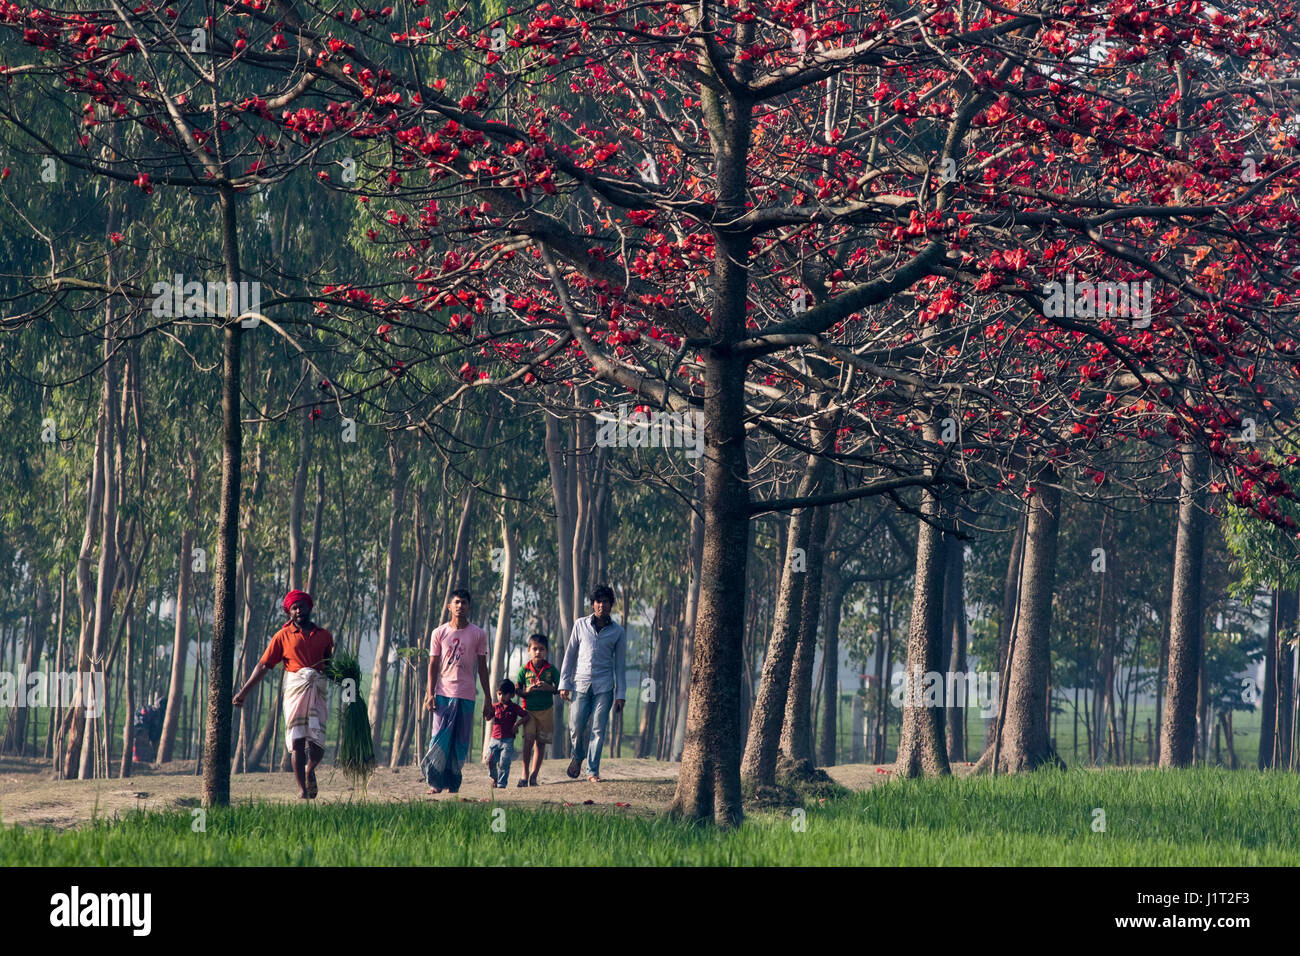 Red Silk Cotton flower trees also known as Bombax Ceiba, Shimul both sides of a road. Narsingdi, Bangladesh. Stock Photo